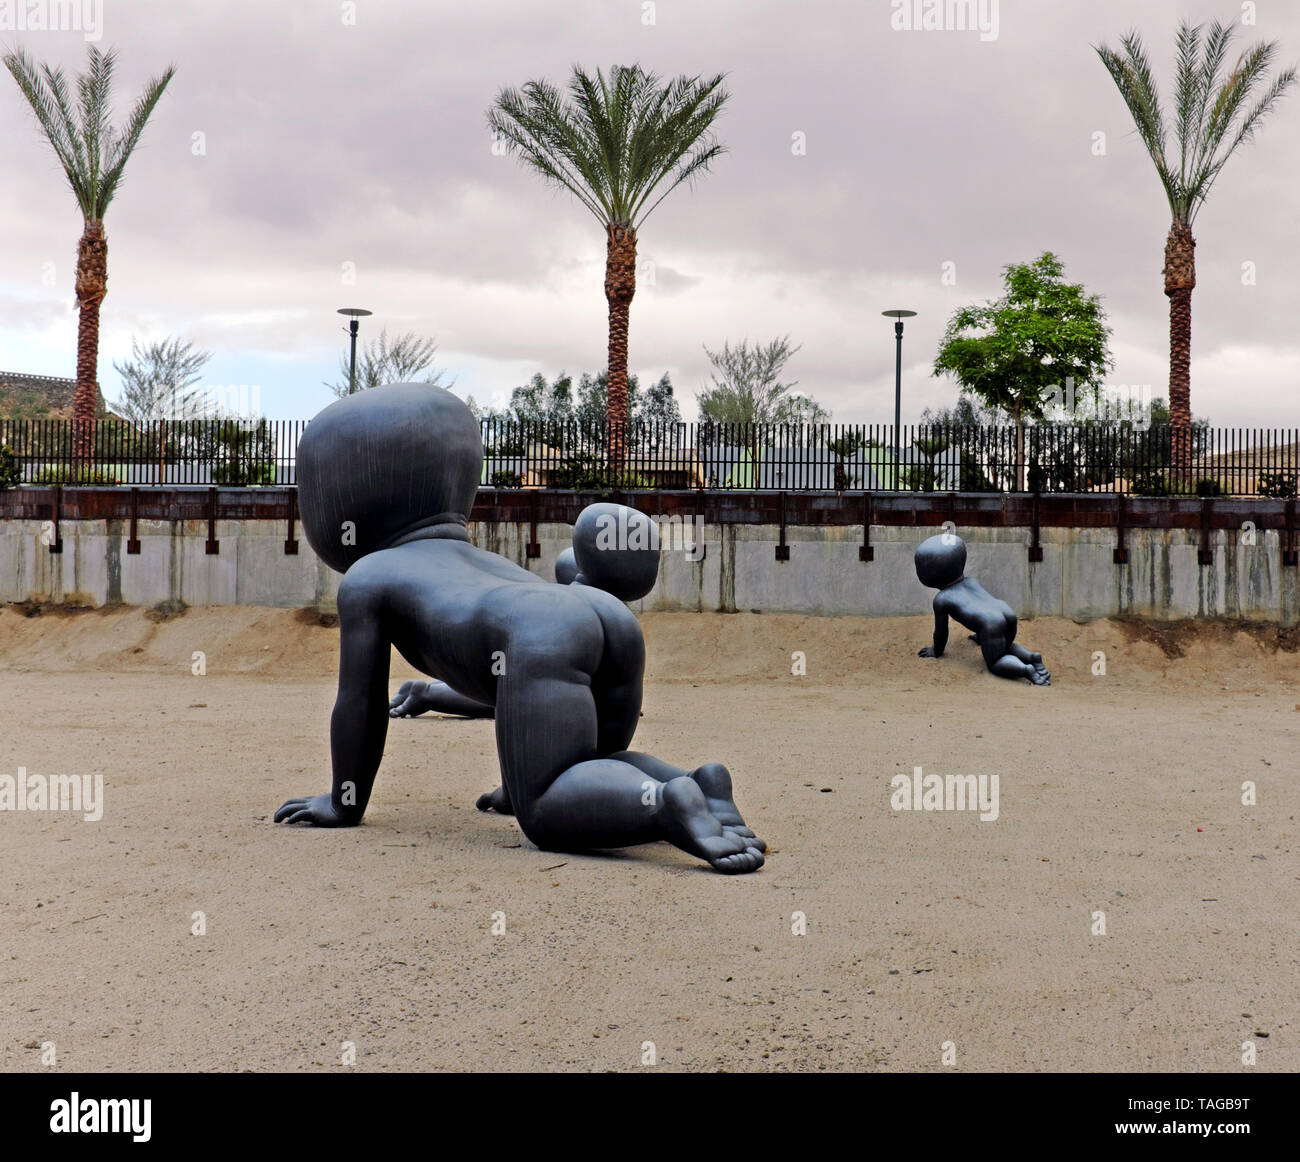 Babies on the Move art installation in downtown Palms Springs, California, by David Cerny represents the dehumanization of society. Stock Photo